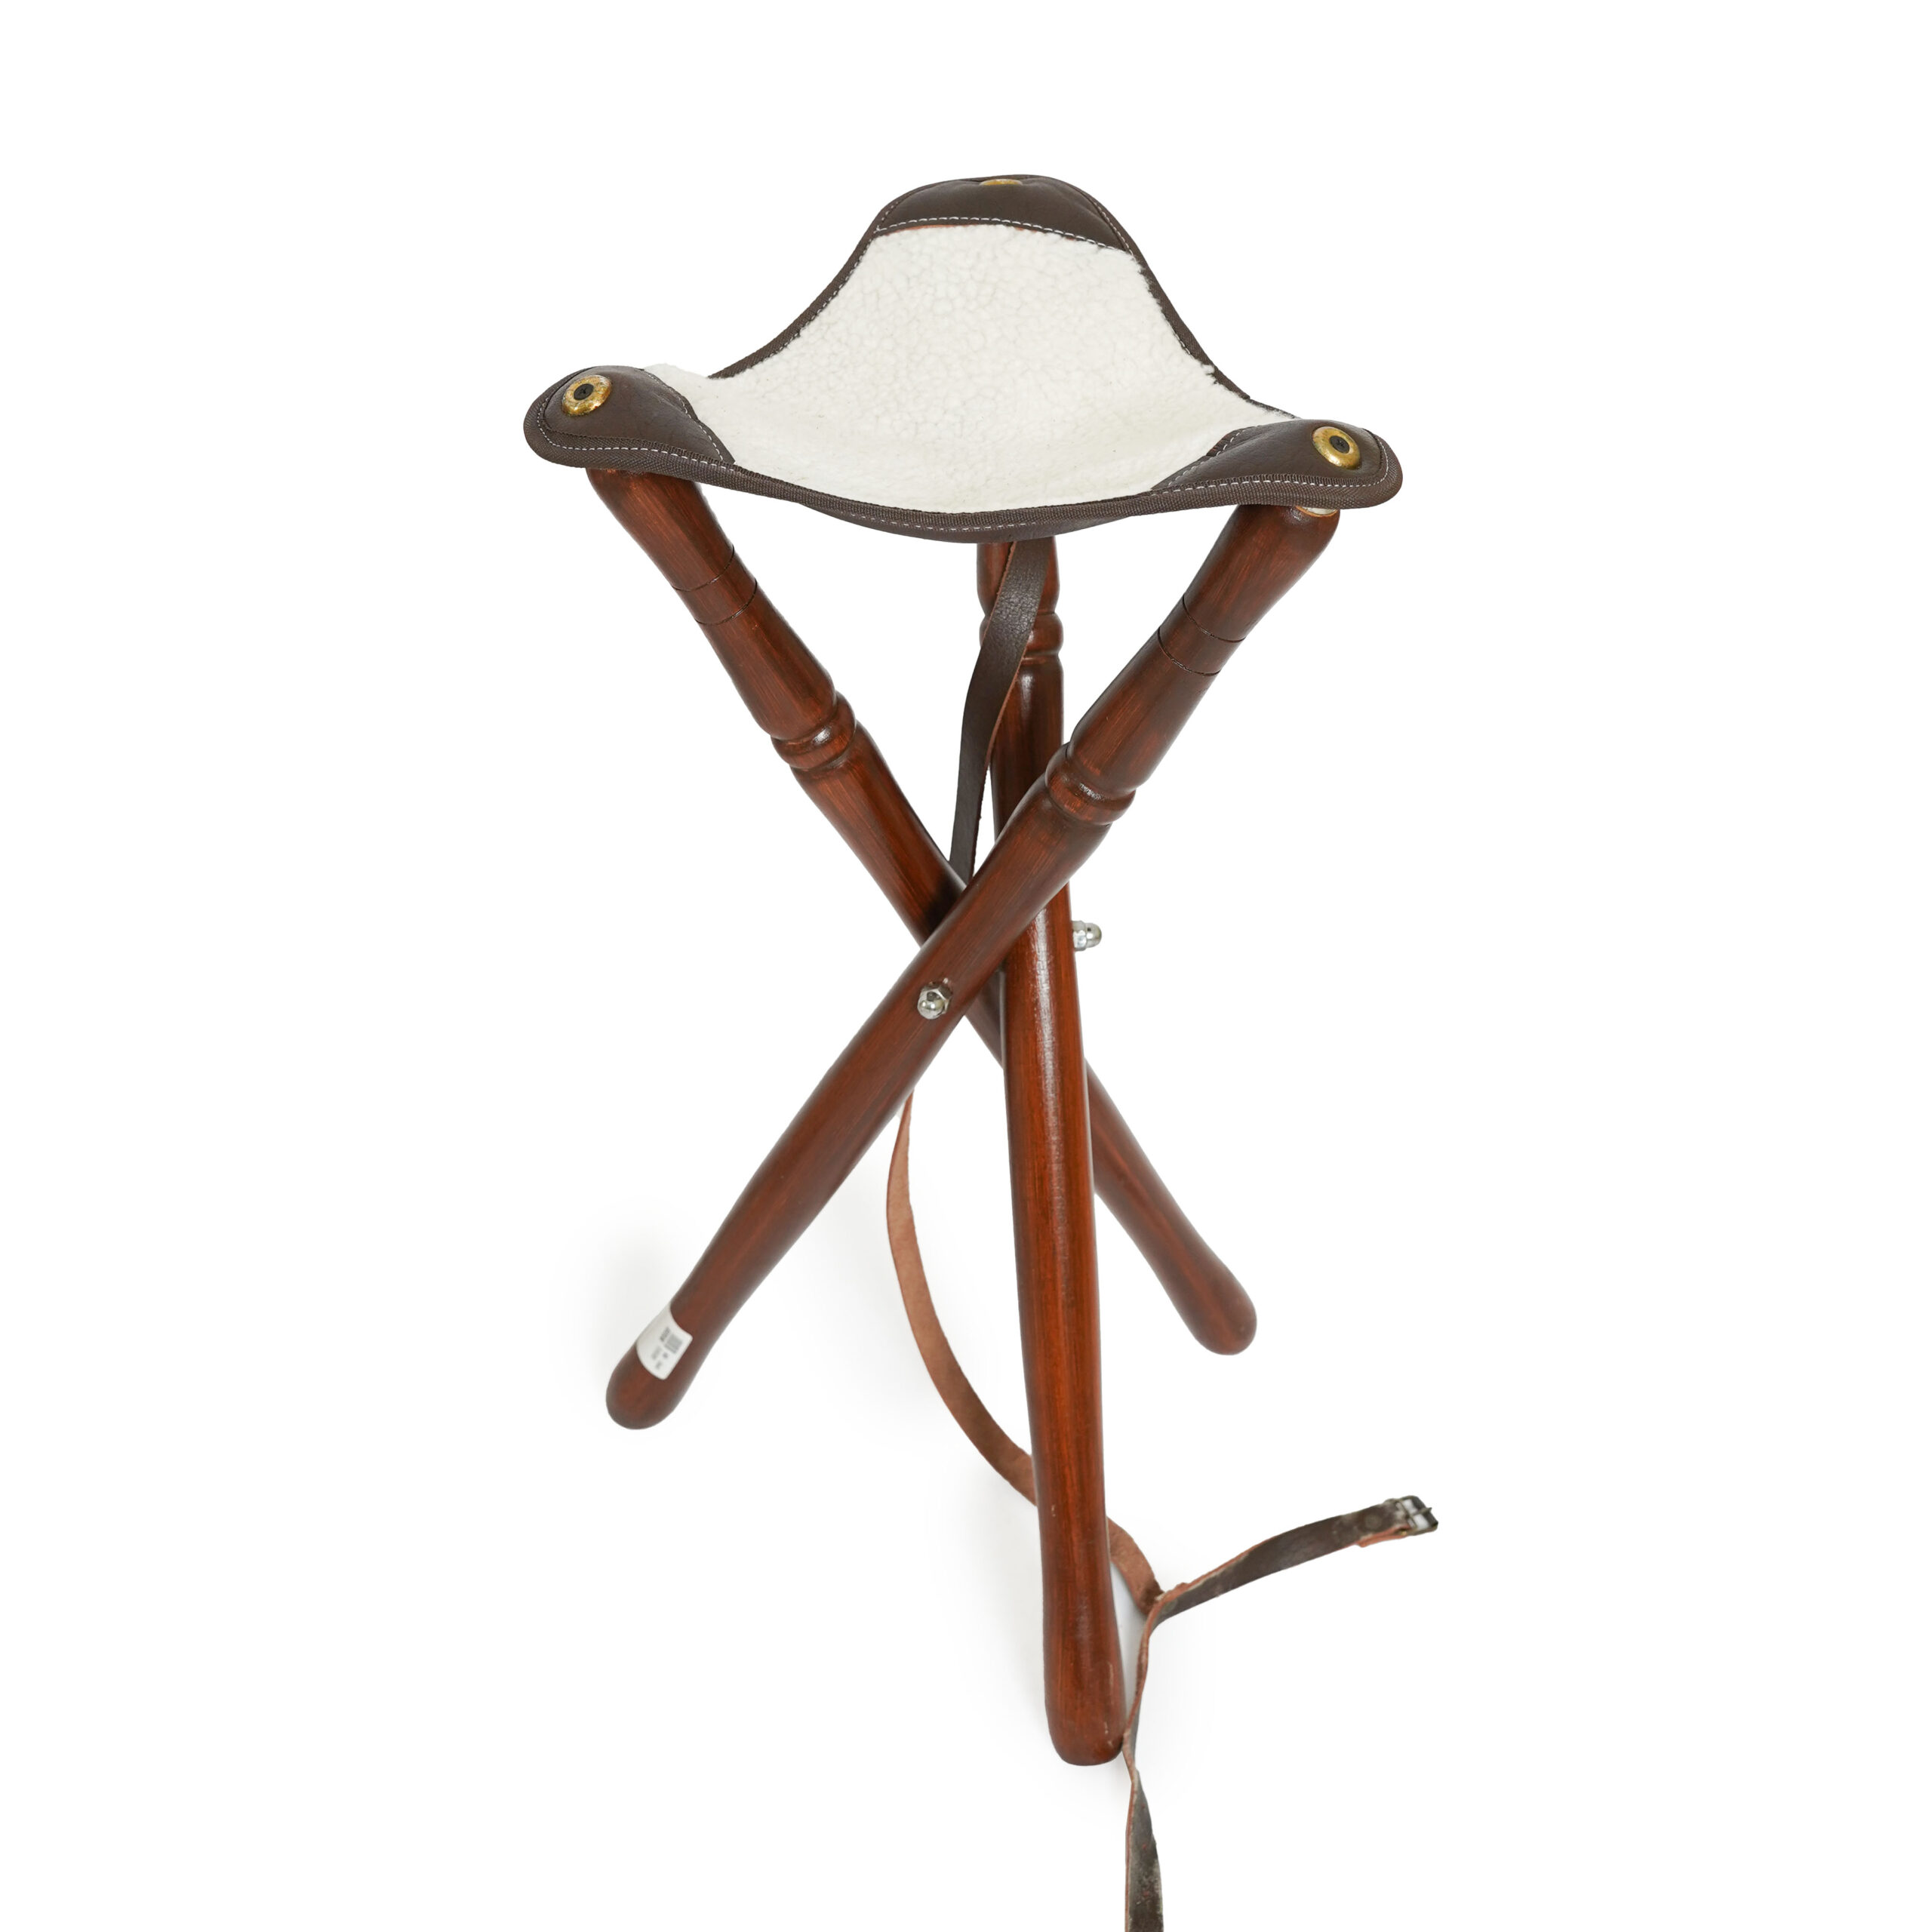 leather camping stool, tripod camping stool